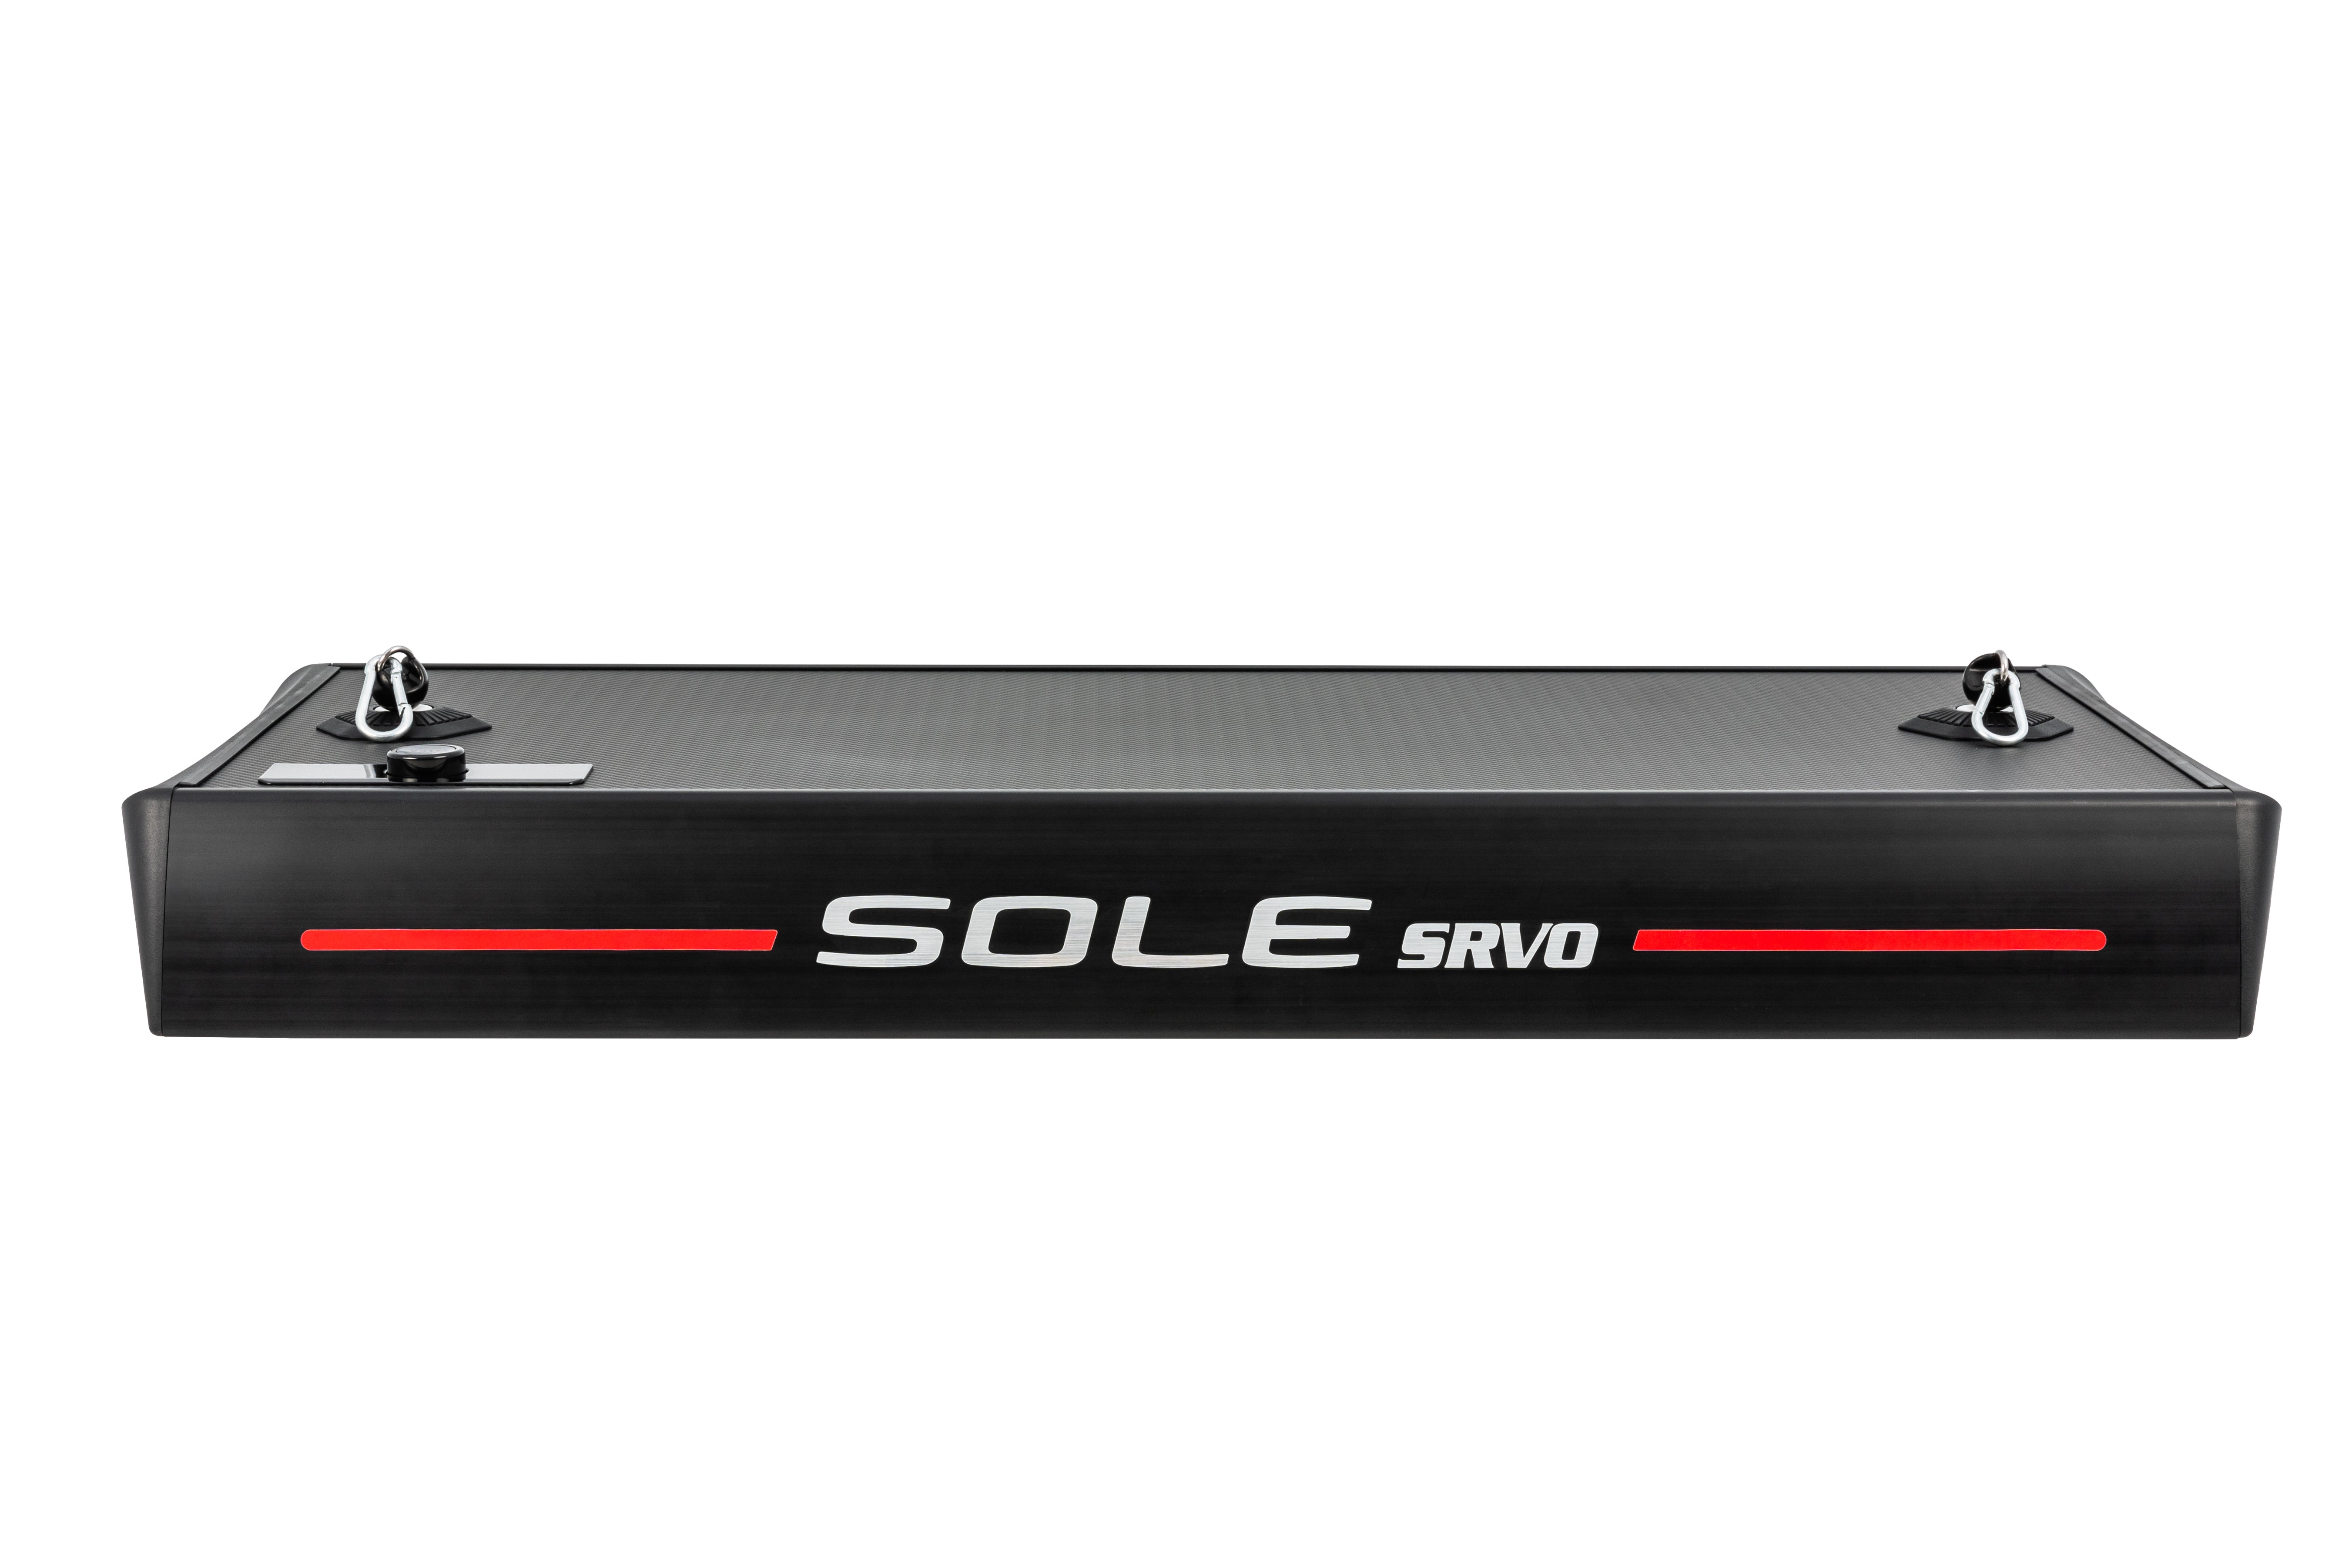 Side view of the Sole SRVO resistance platform showcasing its sleek black design, two metal anchor points on each end, and a centered "SOLE SRVO" logo with a red stripe accent.